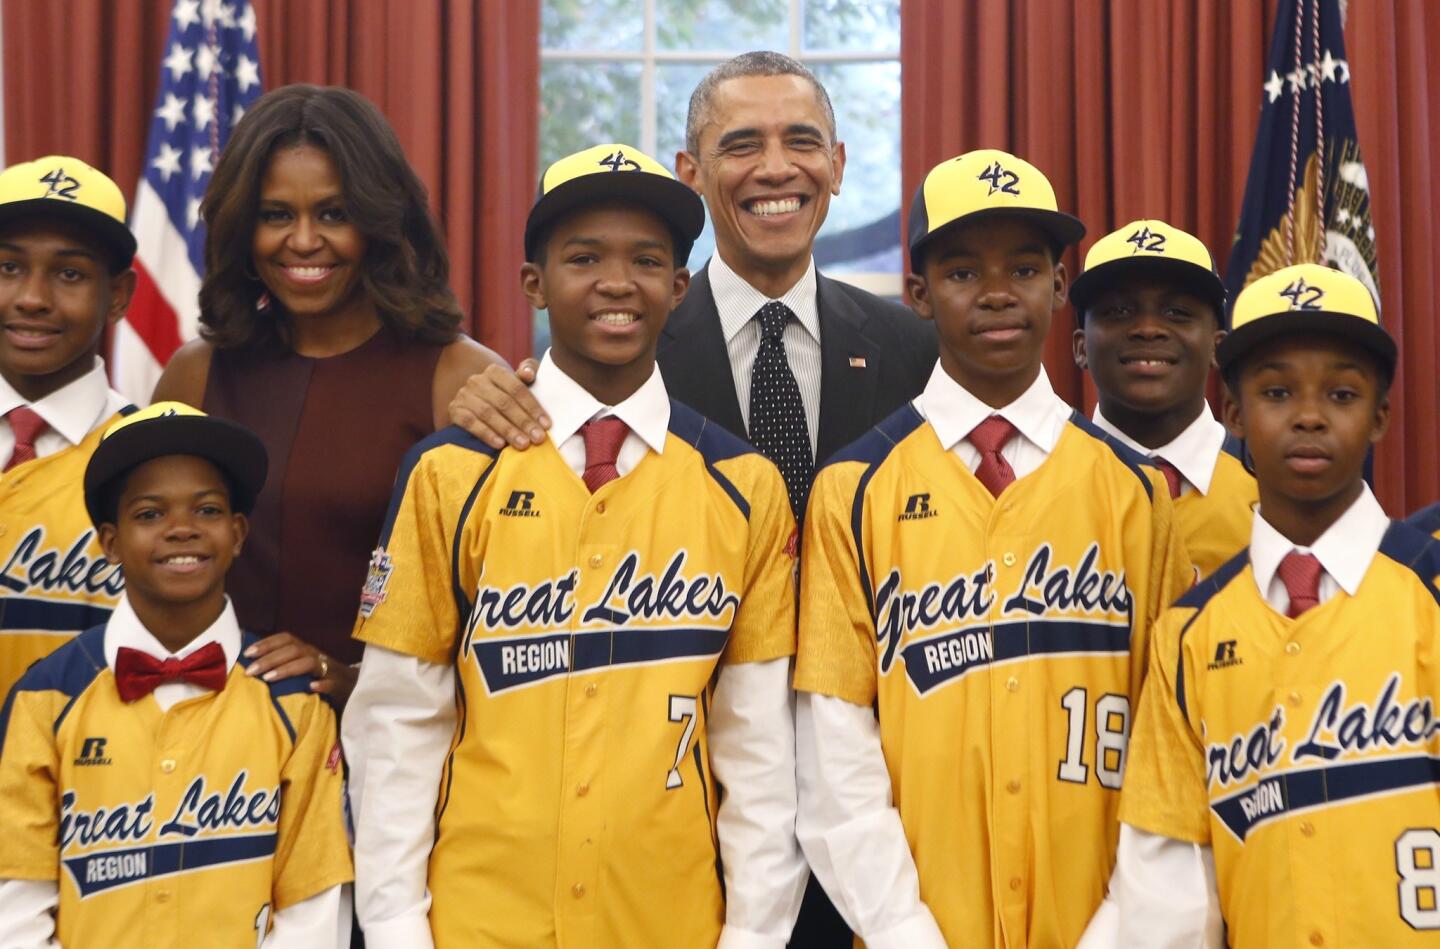 President Barack Obama and first lady Michelle Obama pose with the 2014 U.S. champion Jackie Robinson West All-Stars Little League baseball team Nov. 6, 2014, in the Oval Office.